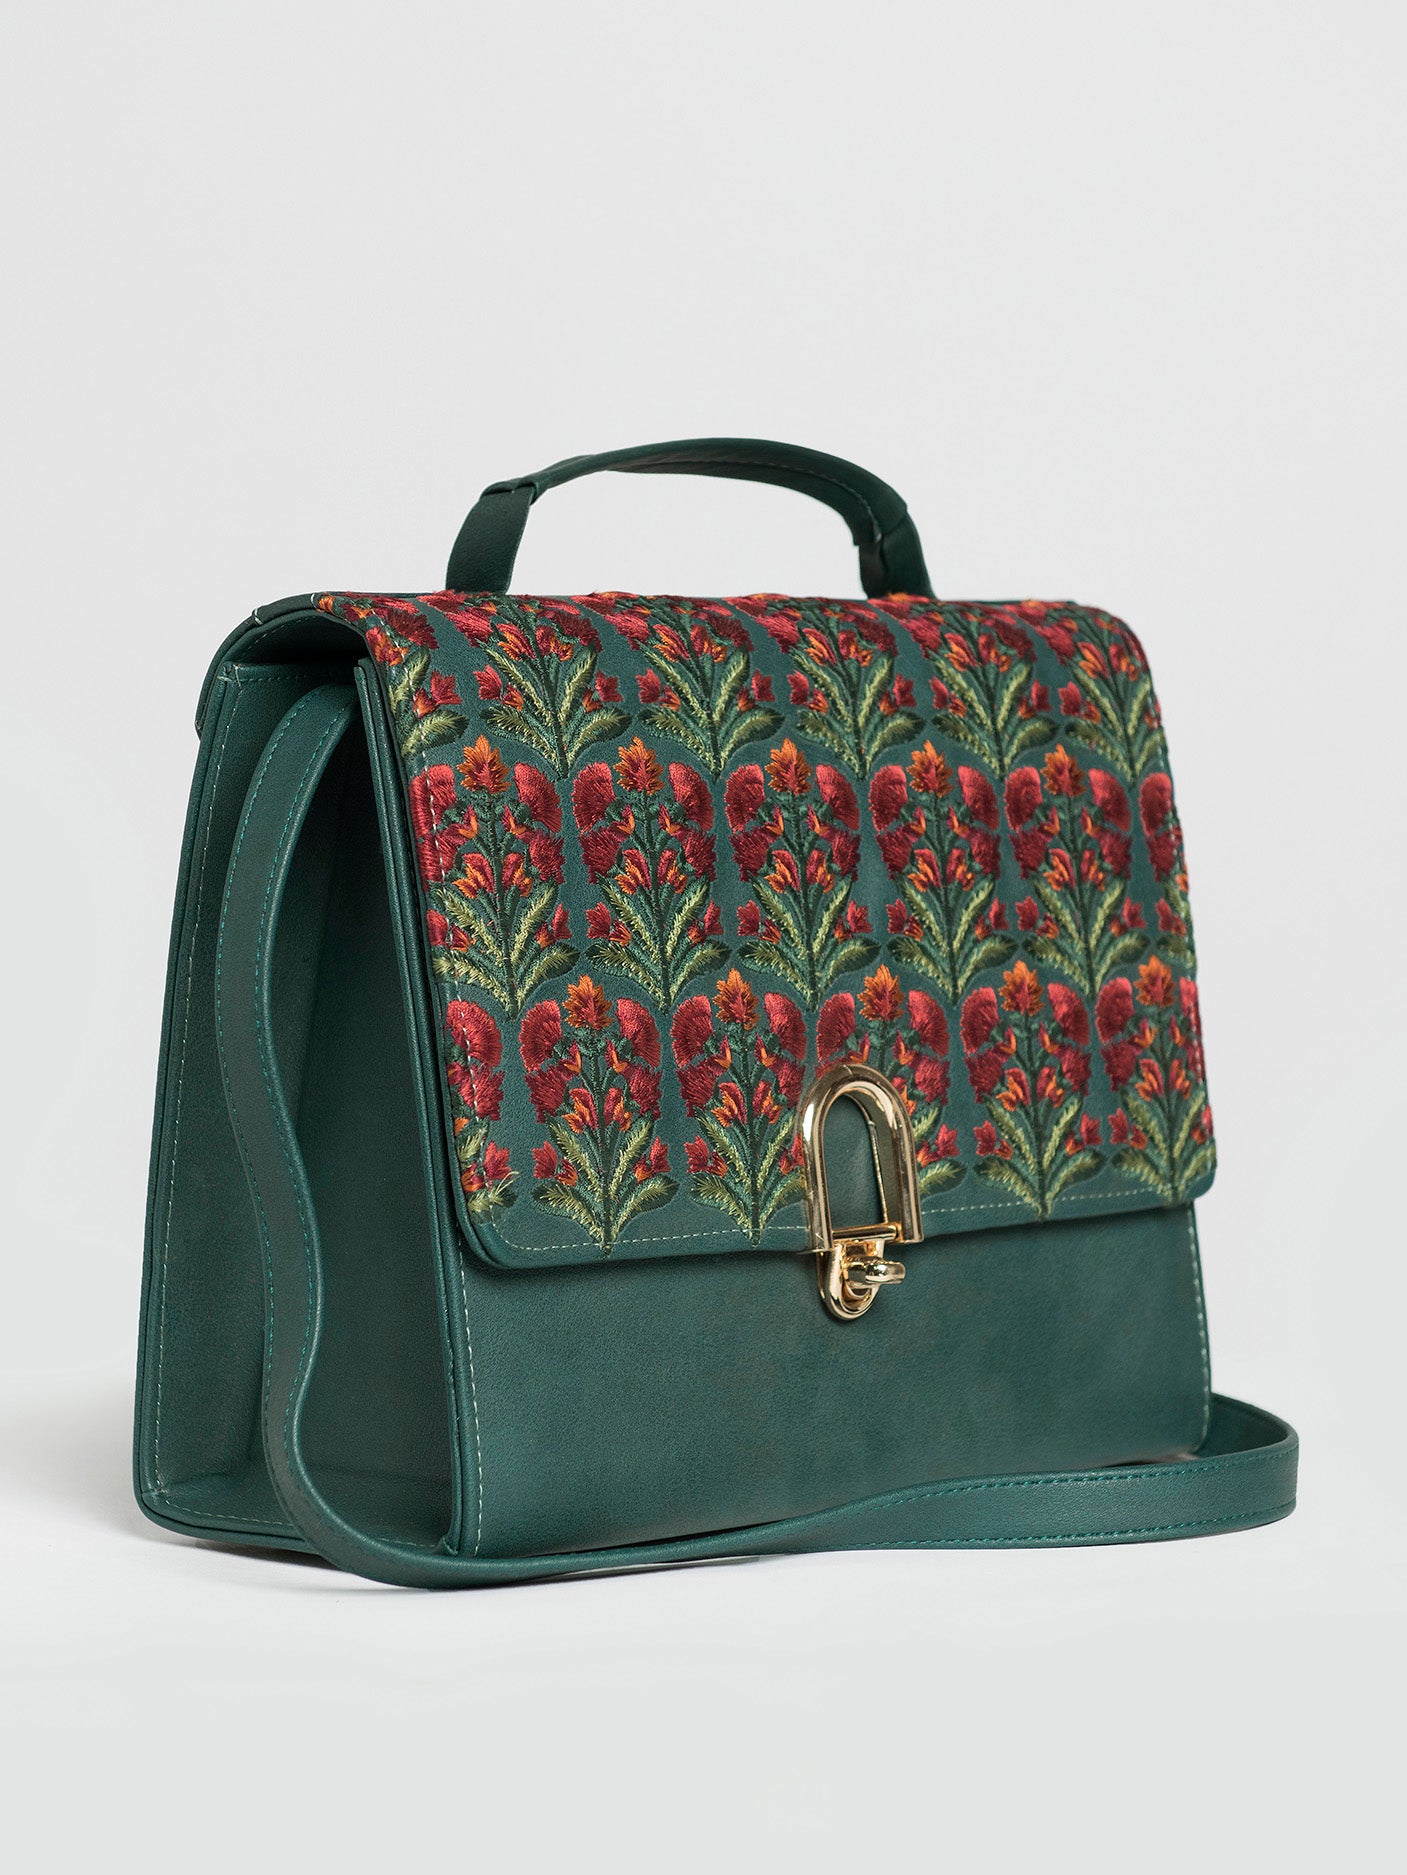 Fancy Embroidered Bag